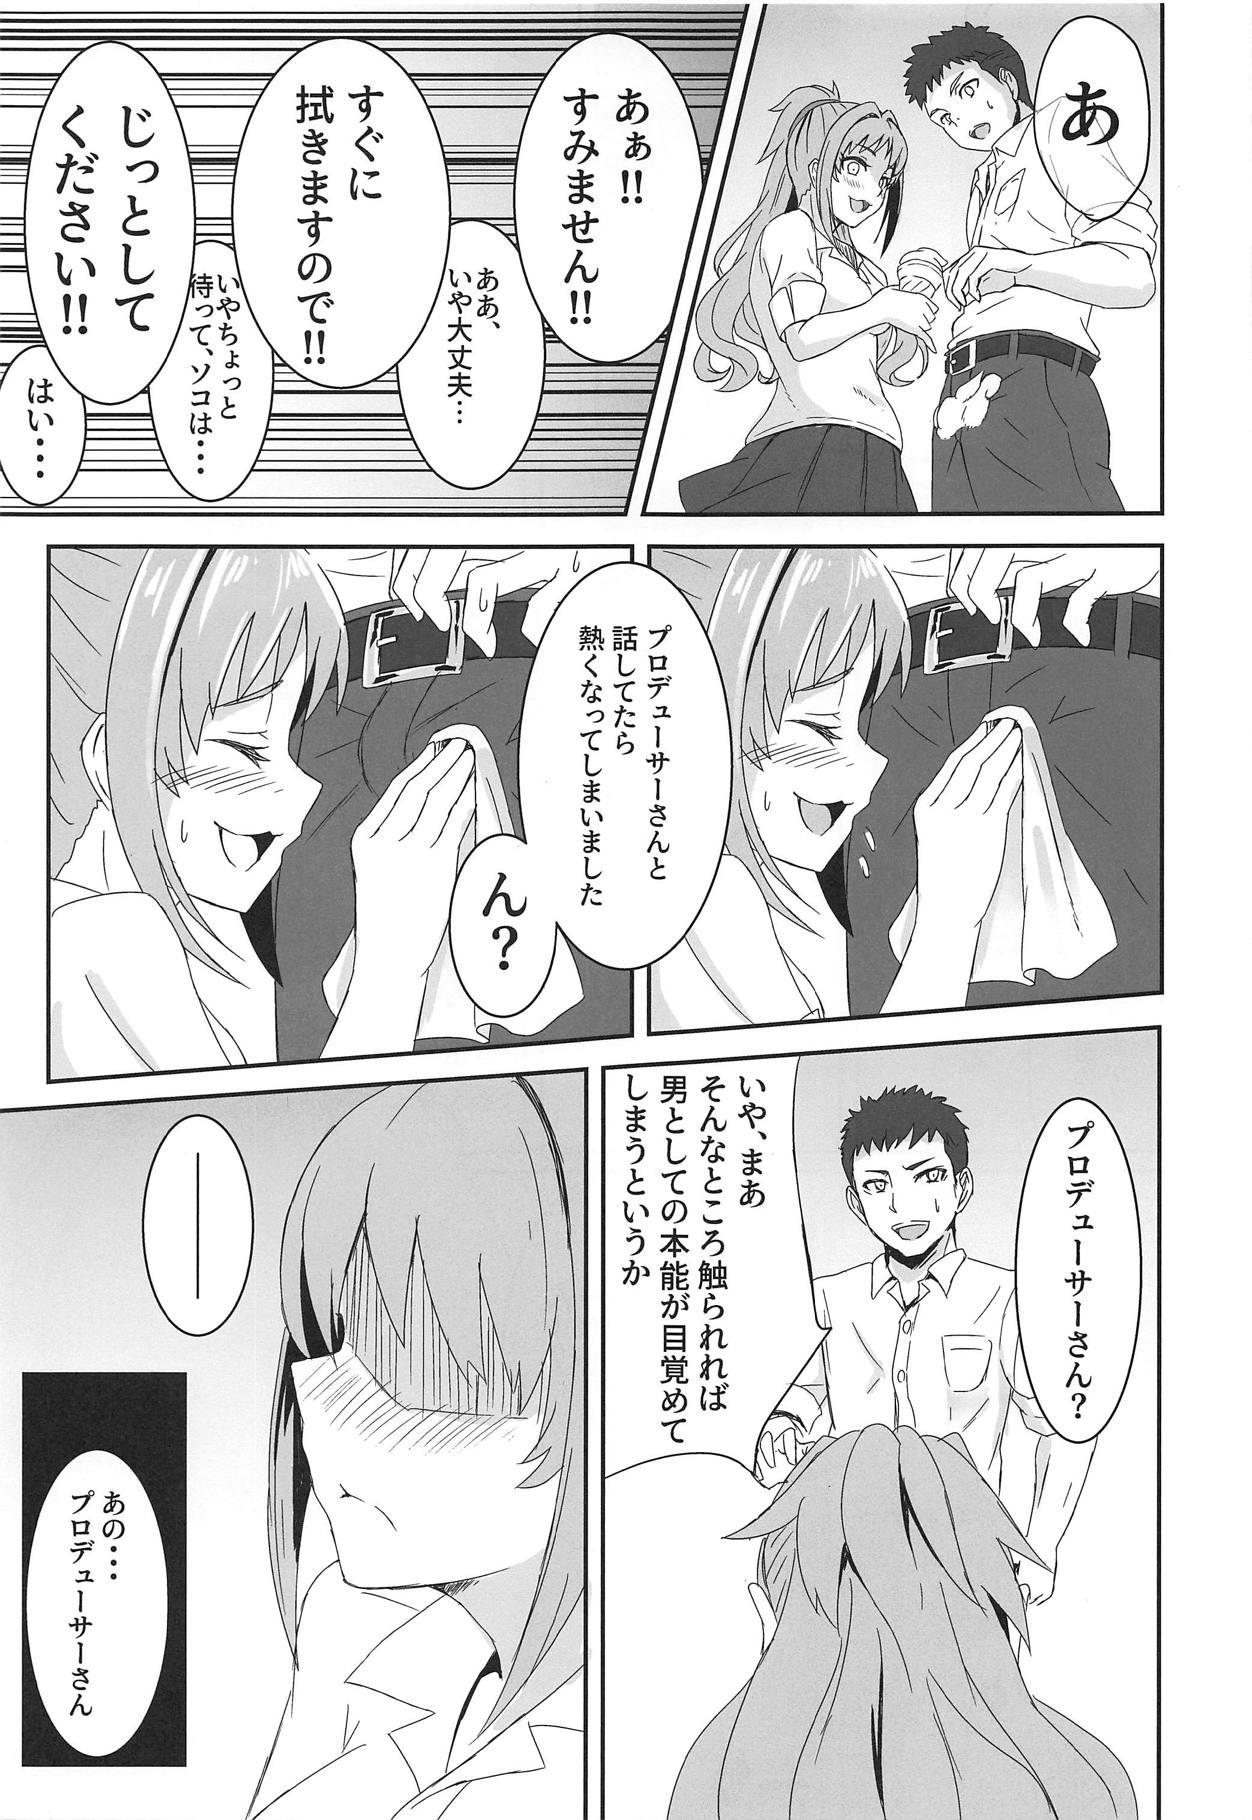 Load Ax3S! - The idolmaster Teen - Page 4